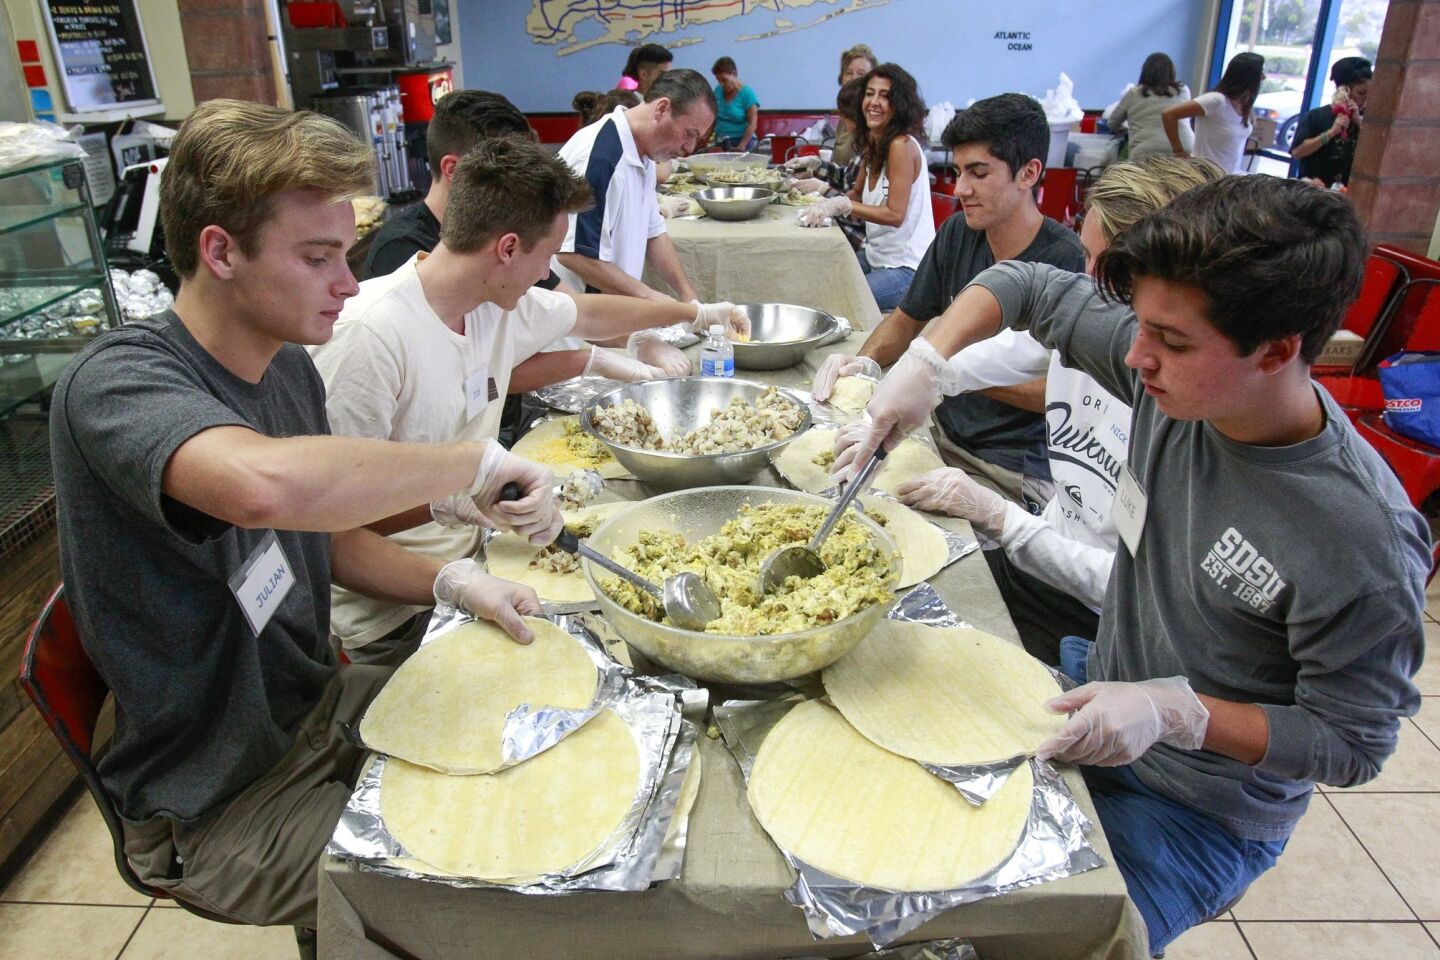 Burrito Boyz members Julian Wahl, left, and Luke Trolinger, both 18, spoon out scrambled eggs on to tortillas as they and other volunteers make egg burritos for homeless people at Long Island Mike's Pizza.